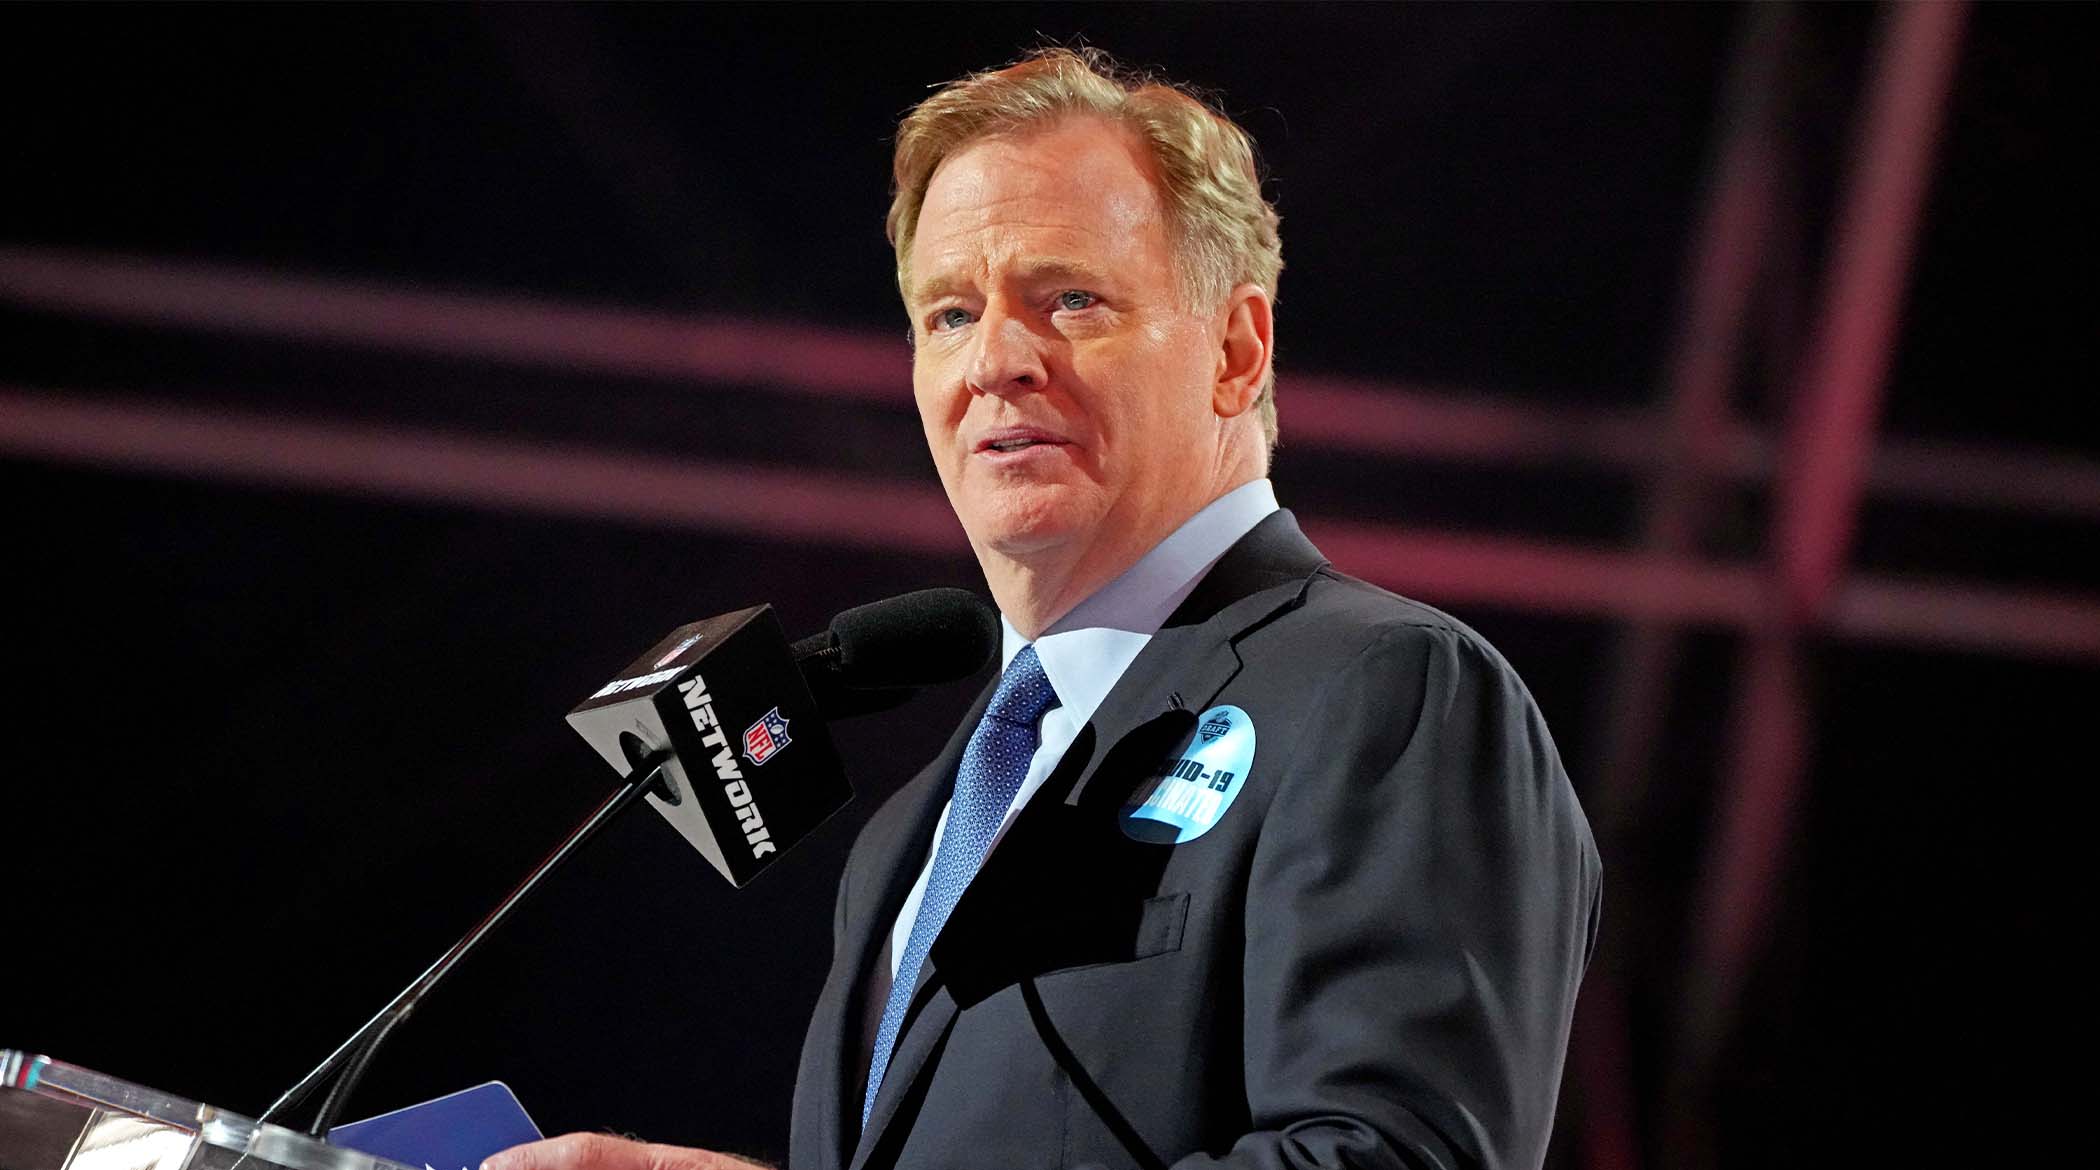 Apr 29, 2021; Cleveland, Ohio, USA; NFL commissioner Roger Goodell announces the final pick of the 2021 NFL Draft for the Tampa Bay Buccaneers at First Energy Stadium.